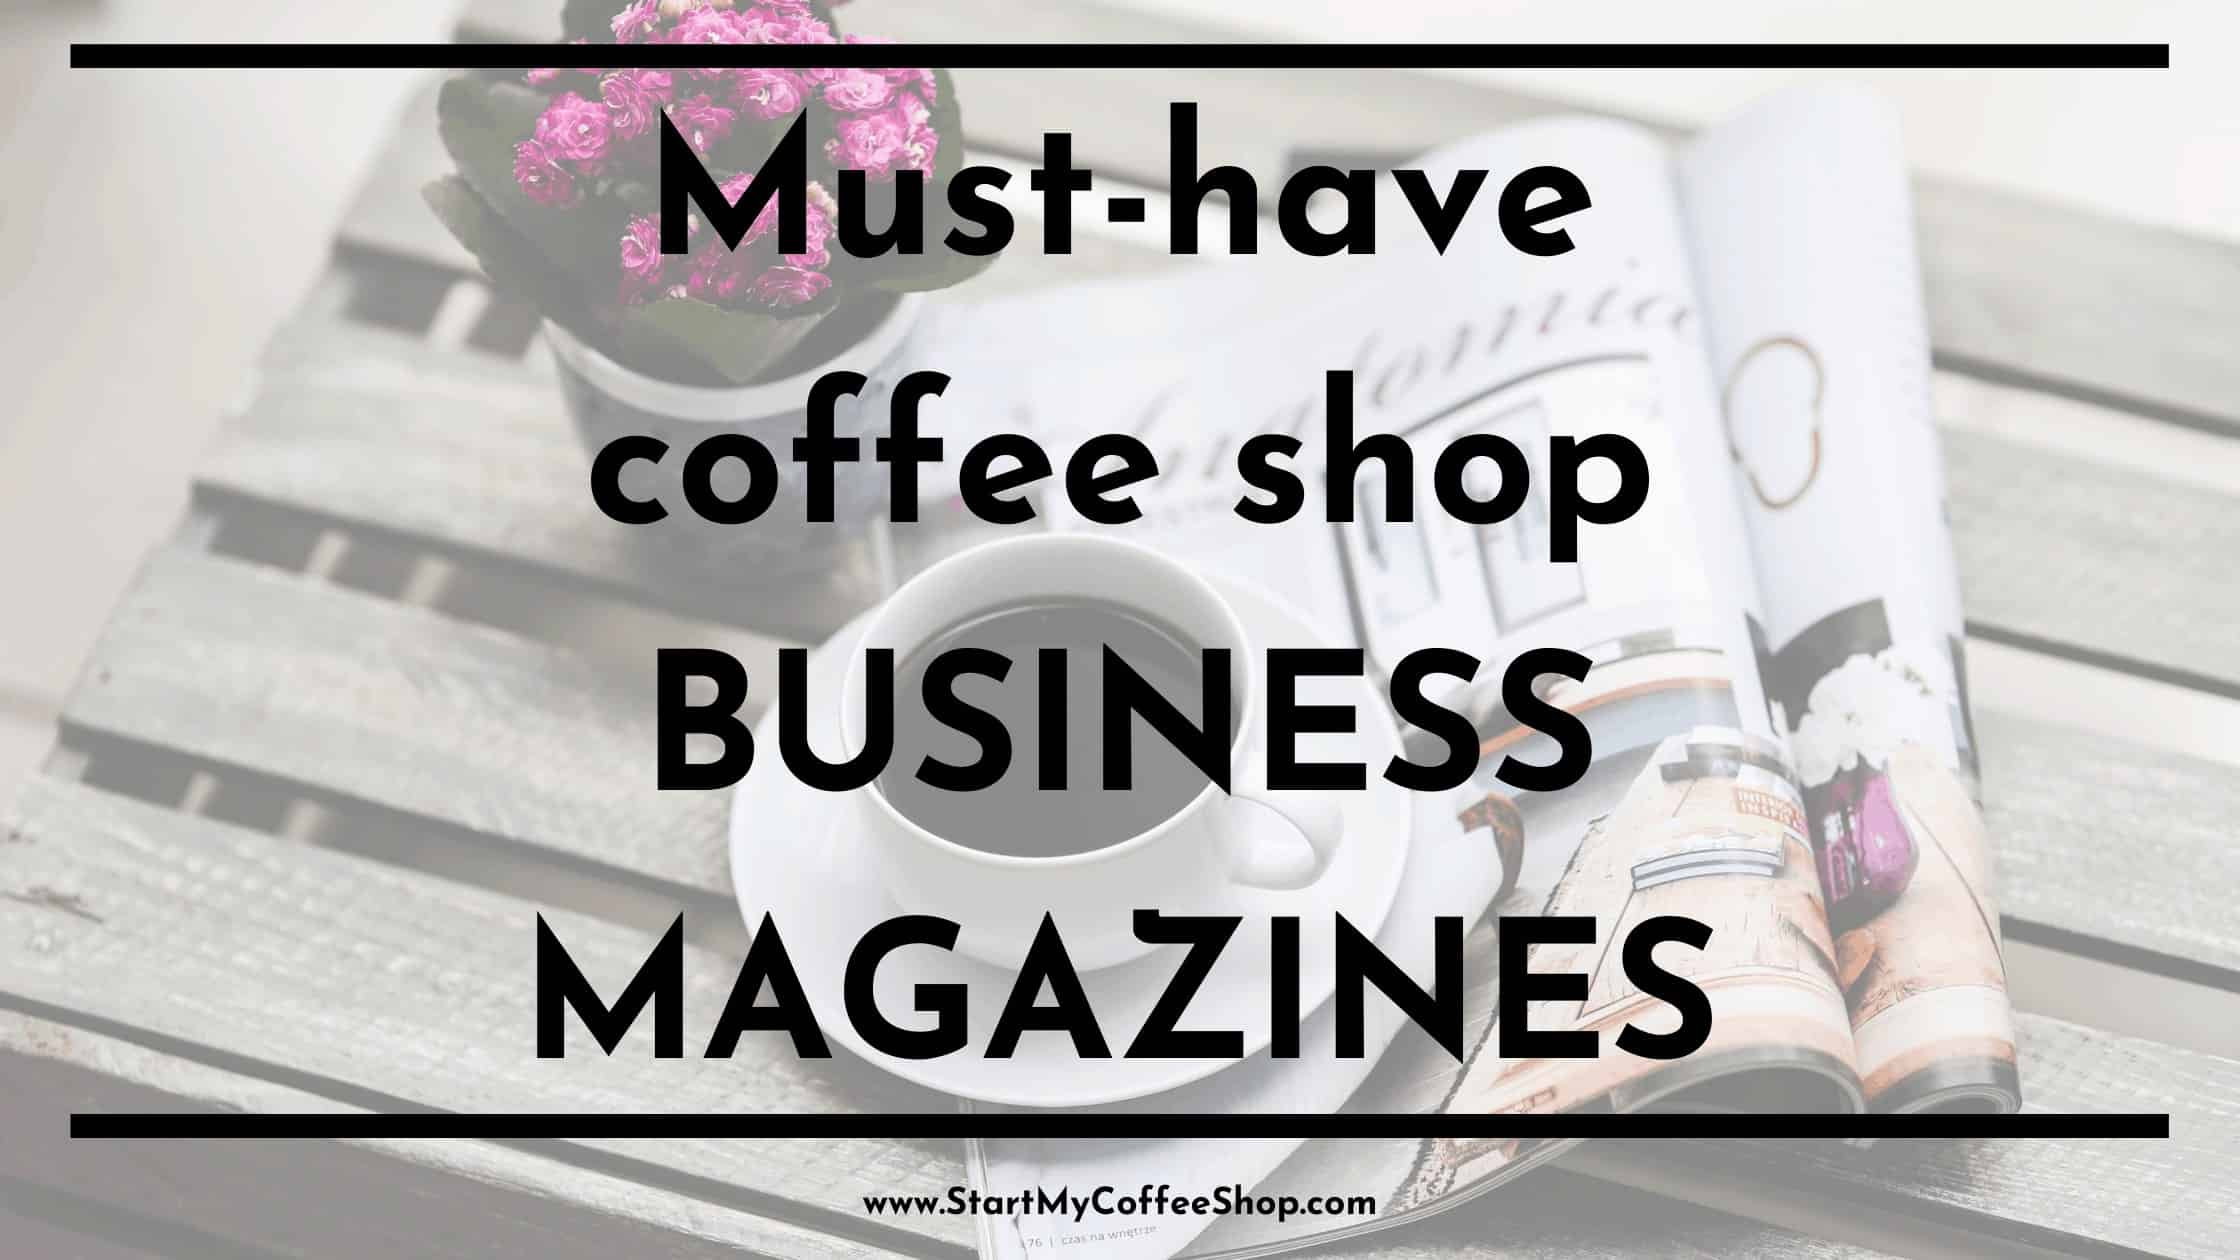 Must-have coffee shop business magazines